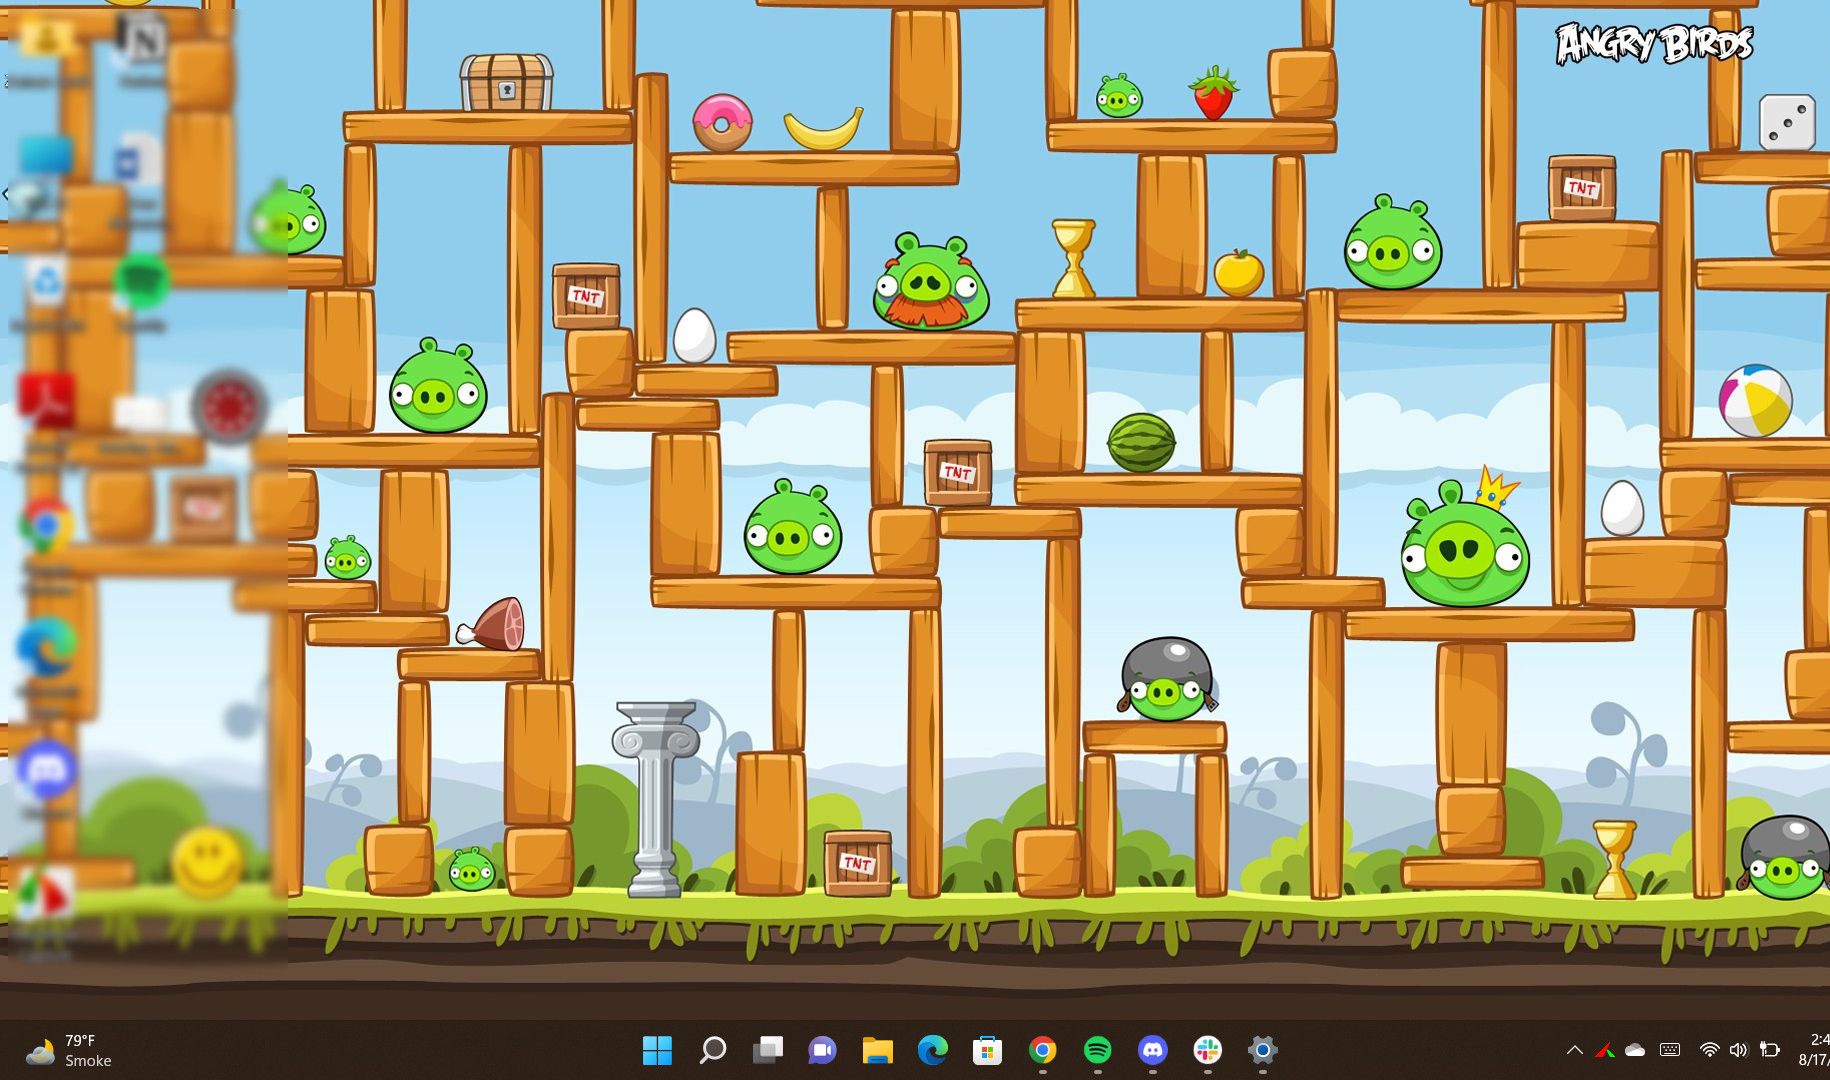 Angry birds theme for Windows 11